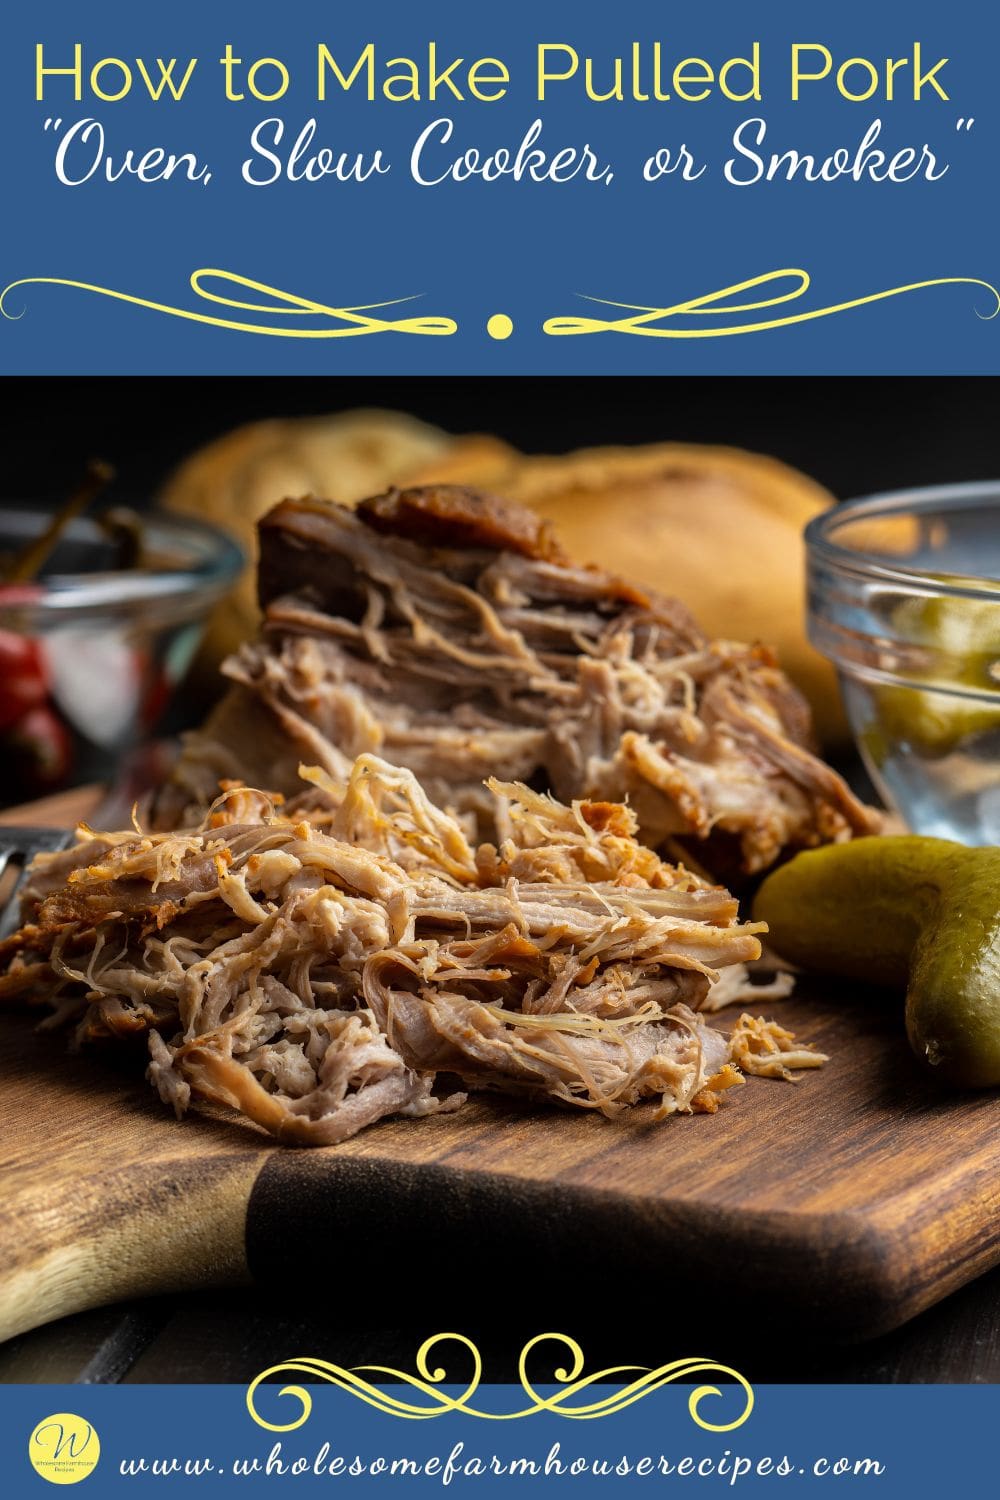 How to Make Pulled Pork Oven, Slow Cooker, or Smoker